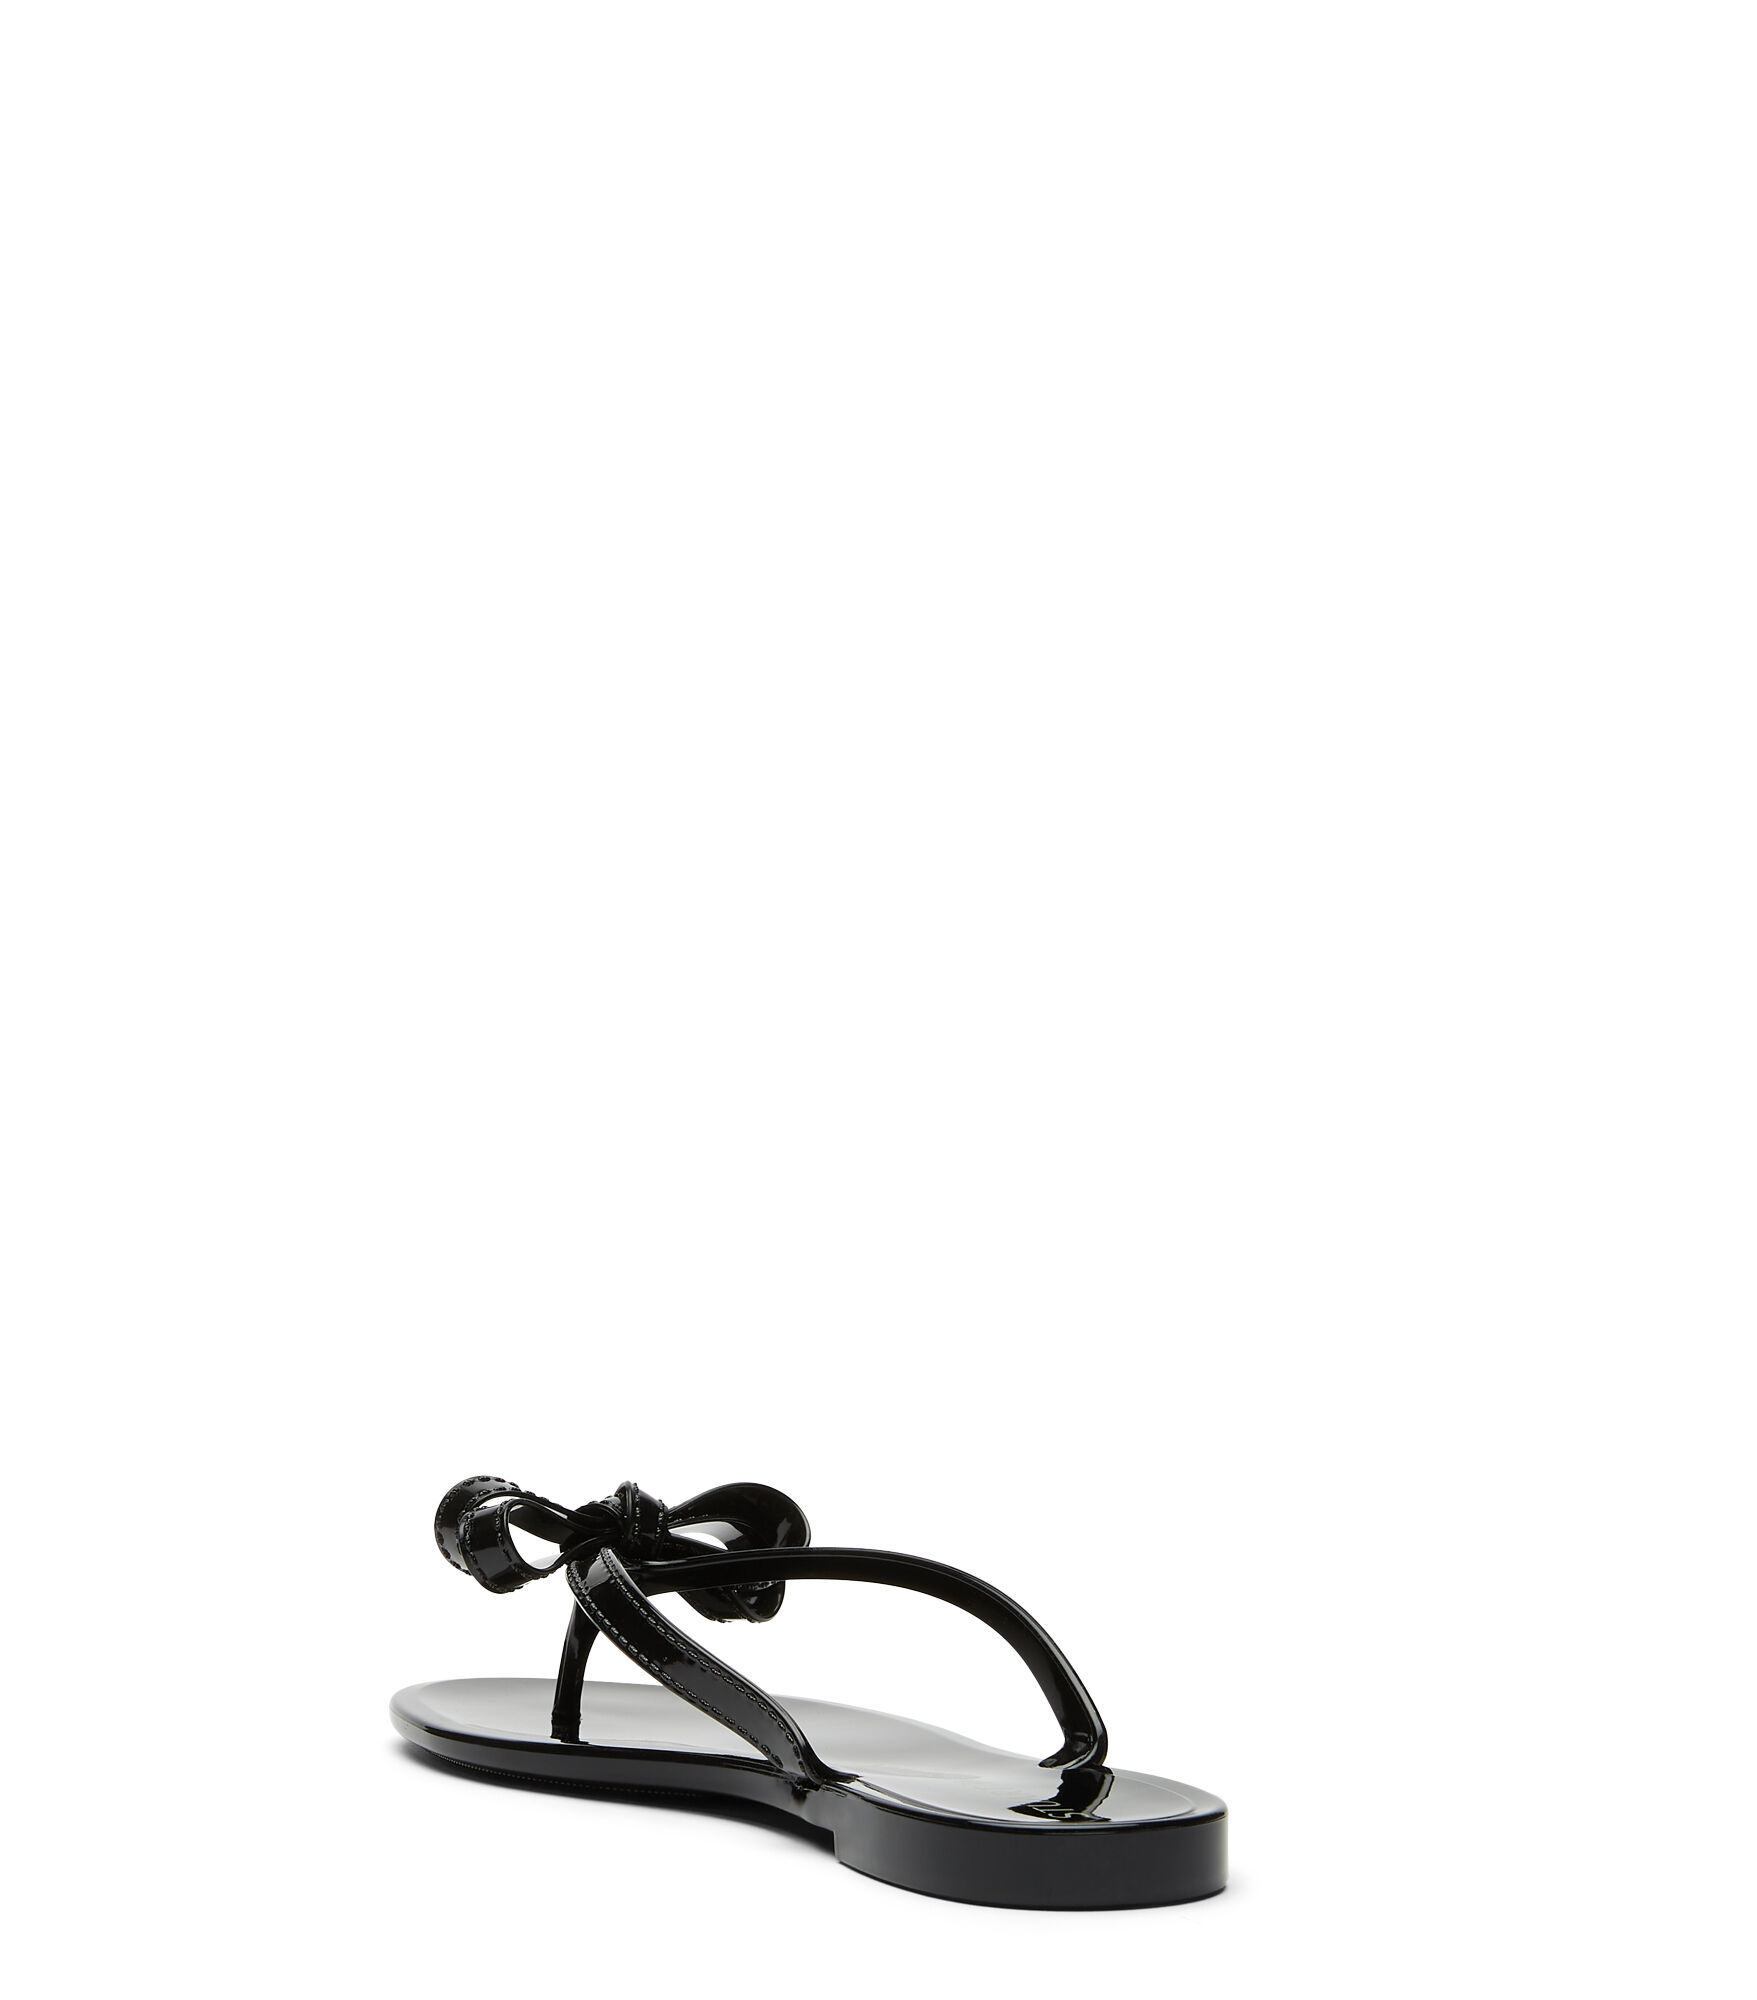 NEW!! Chic Bow & Pyramid Stud Sandal in Black